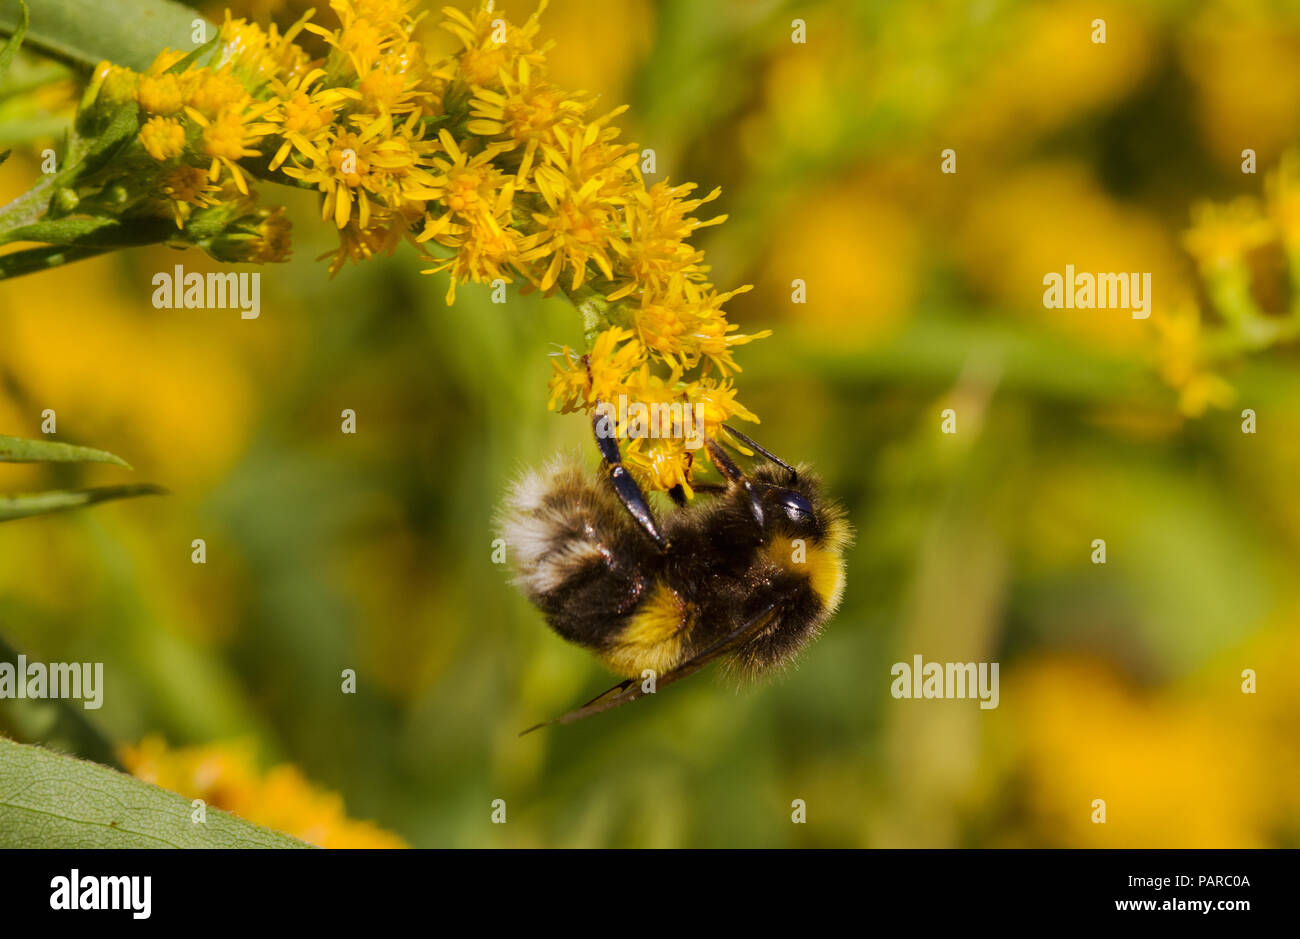 Buff-tailed bumblebee on Goldenrods Stock Photo